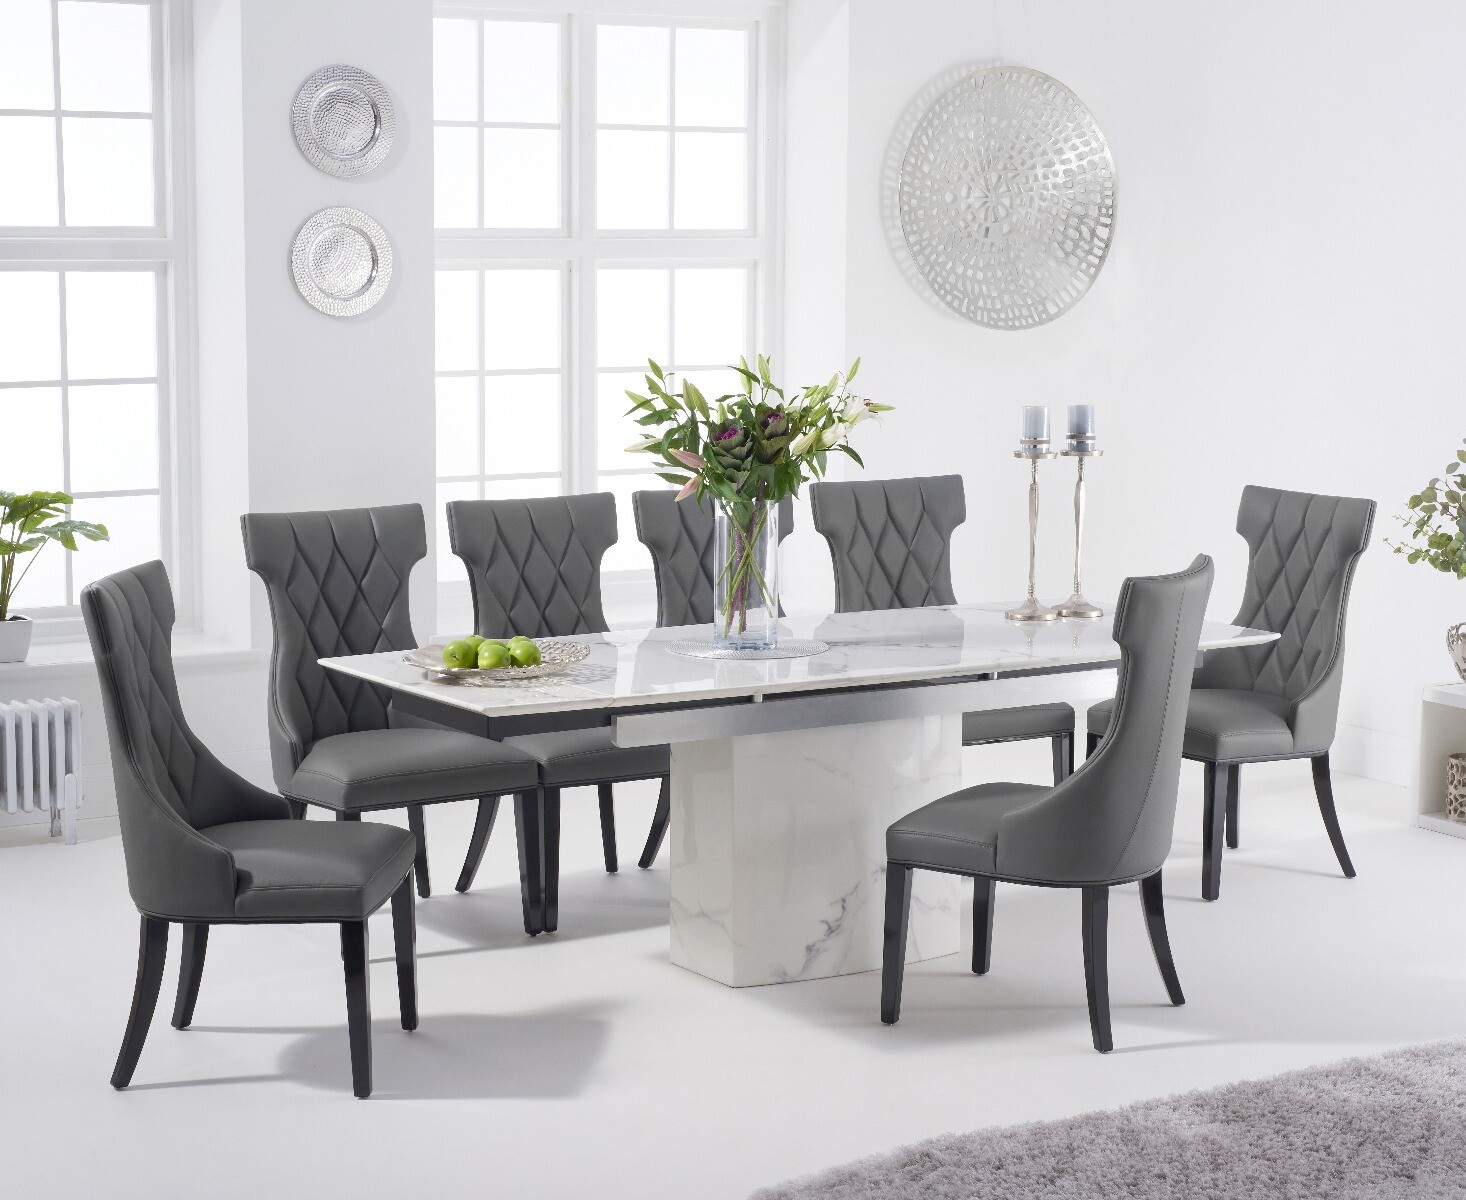 Extending Savona 160cm White Marble Dining Table With 6 Cream Sophia Chairs